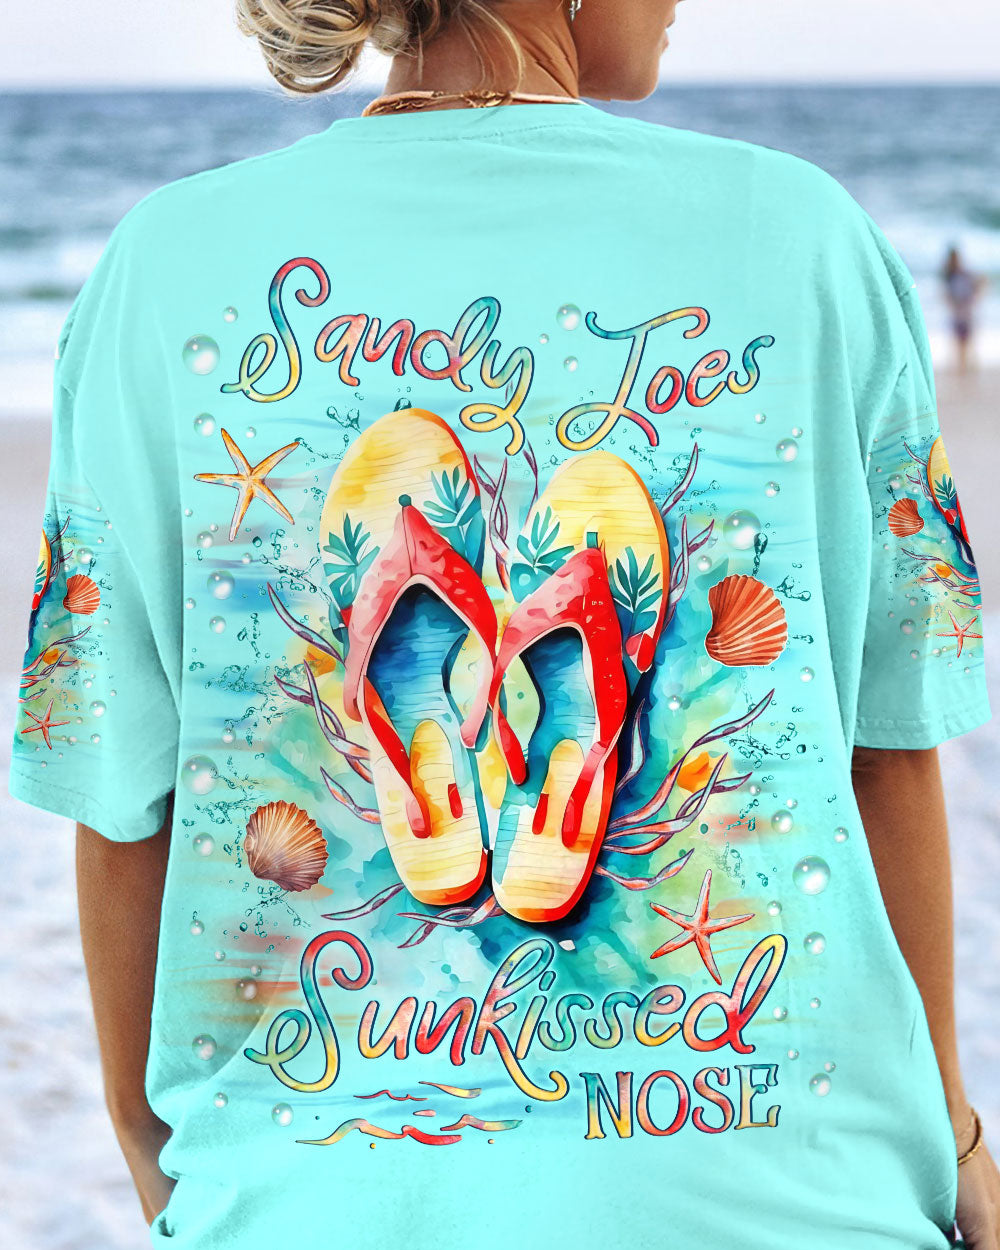 SANDY TOES SUNKISSED NOSE FLIP FLOPS ALL OVER PRINT - YHLN2211232